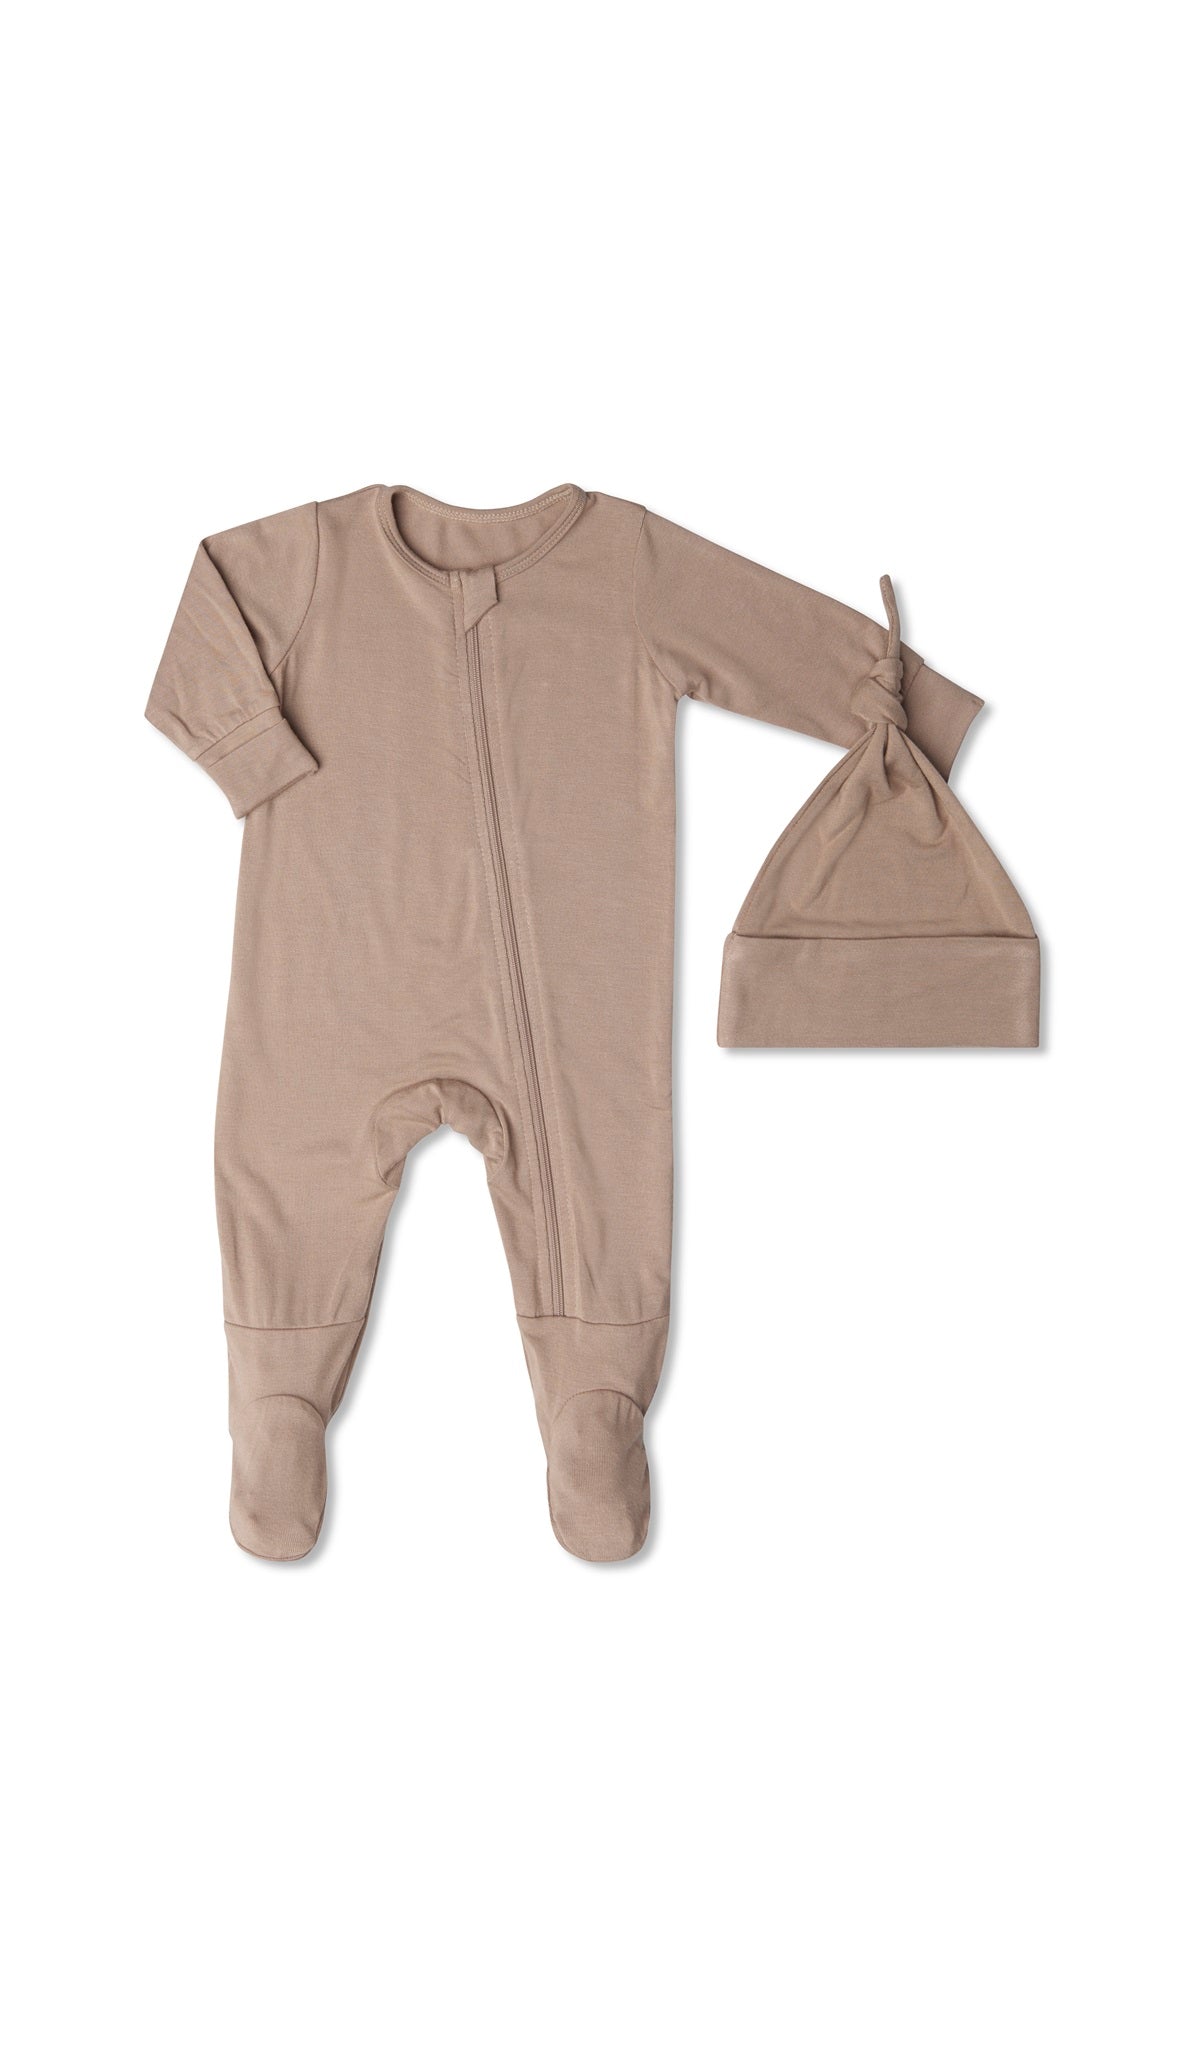 Latte Footie 2-Piece with long sleeves, zip front and matching knotted baby hat.